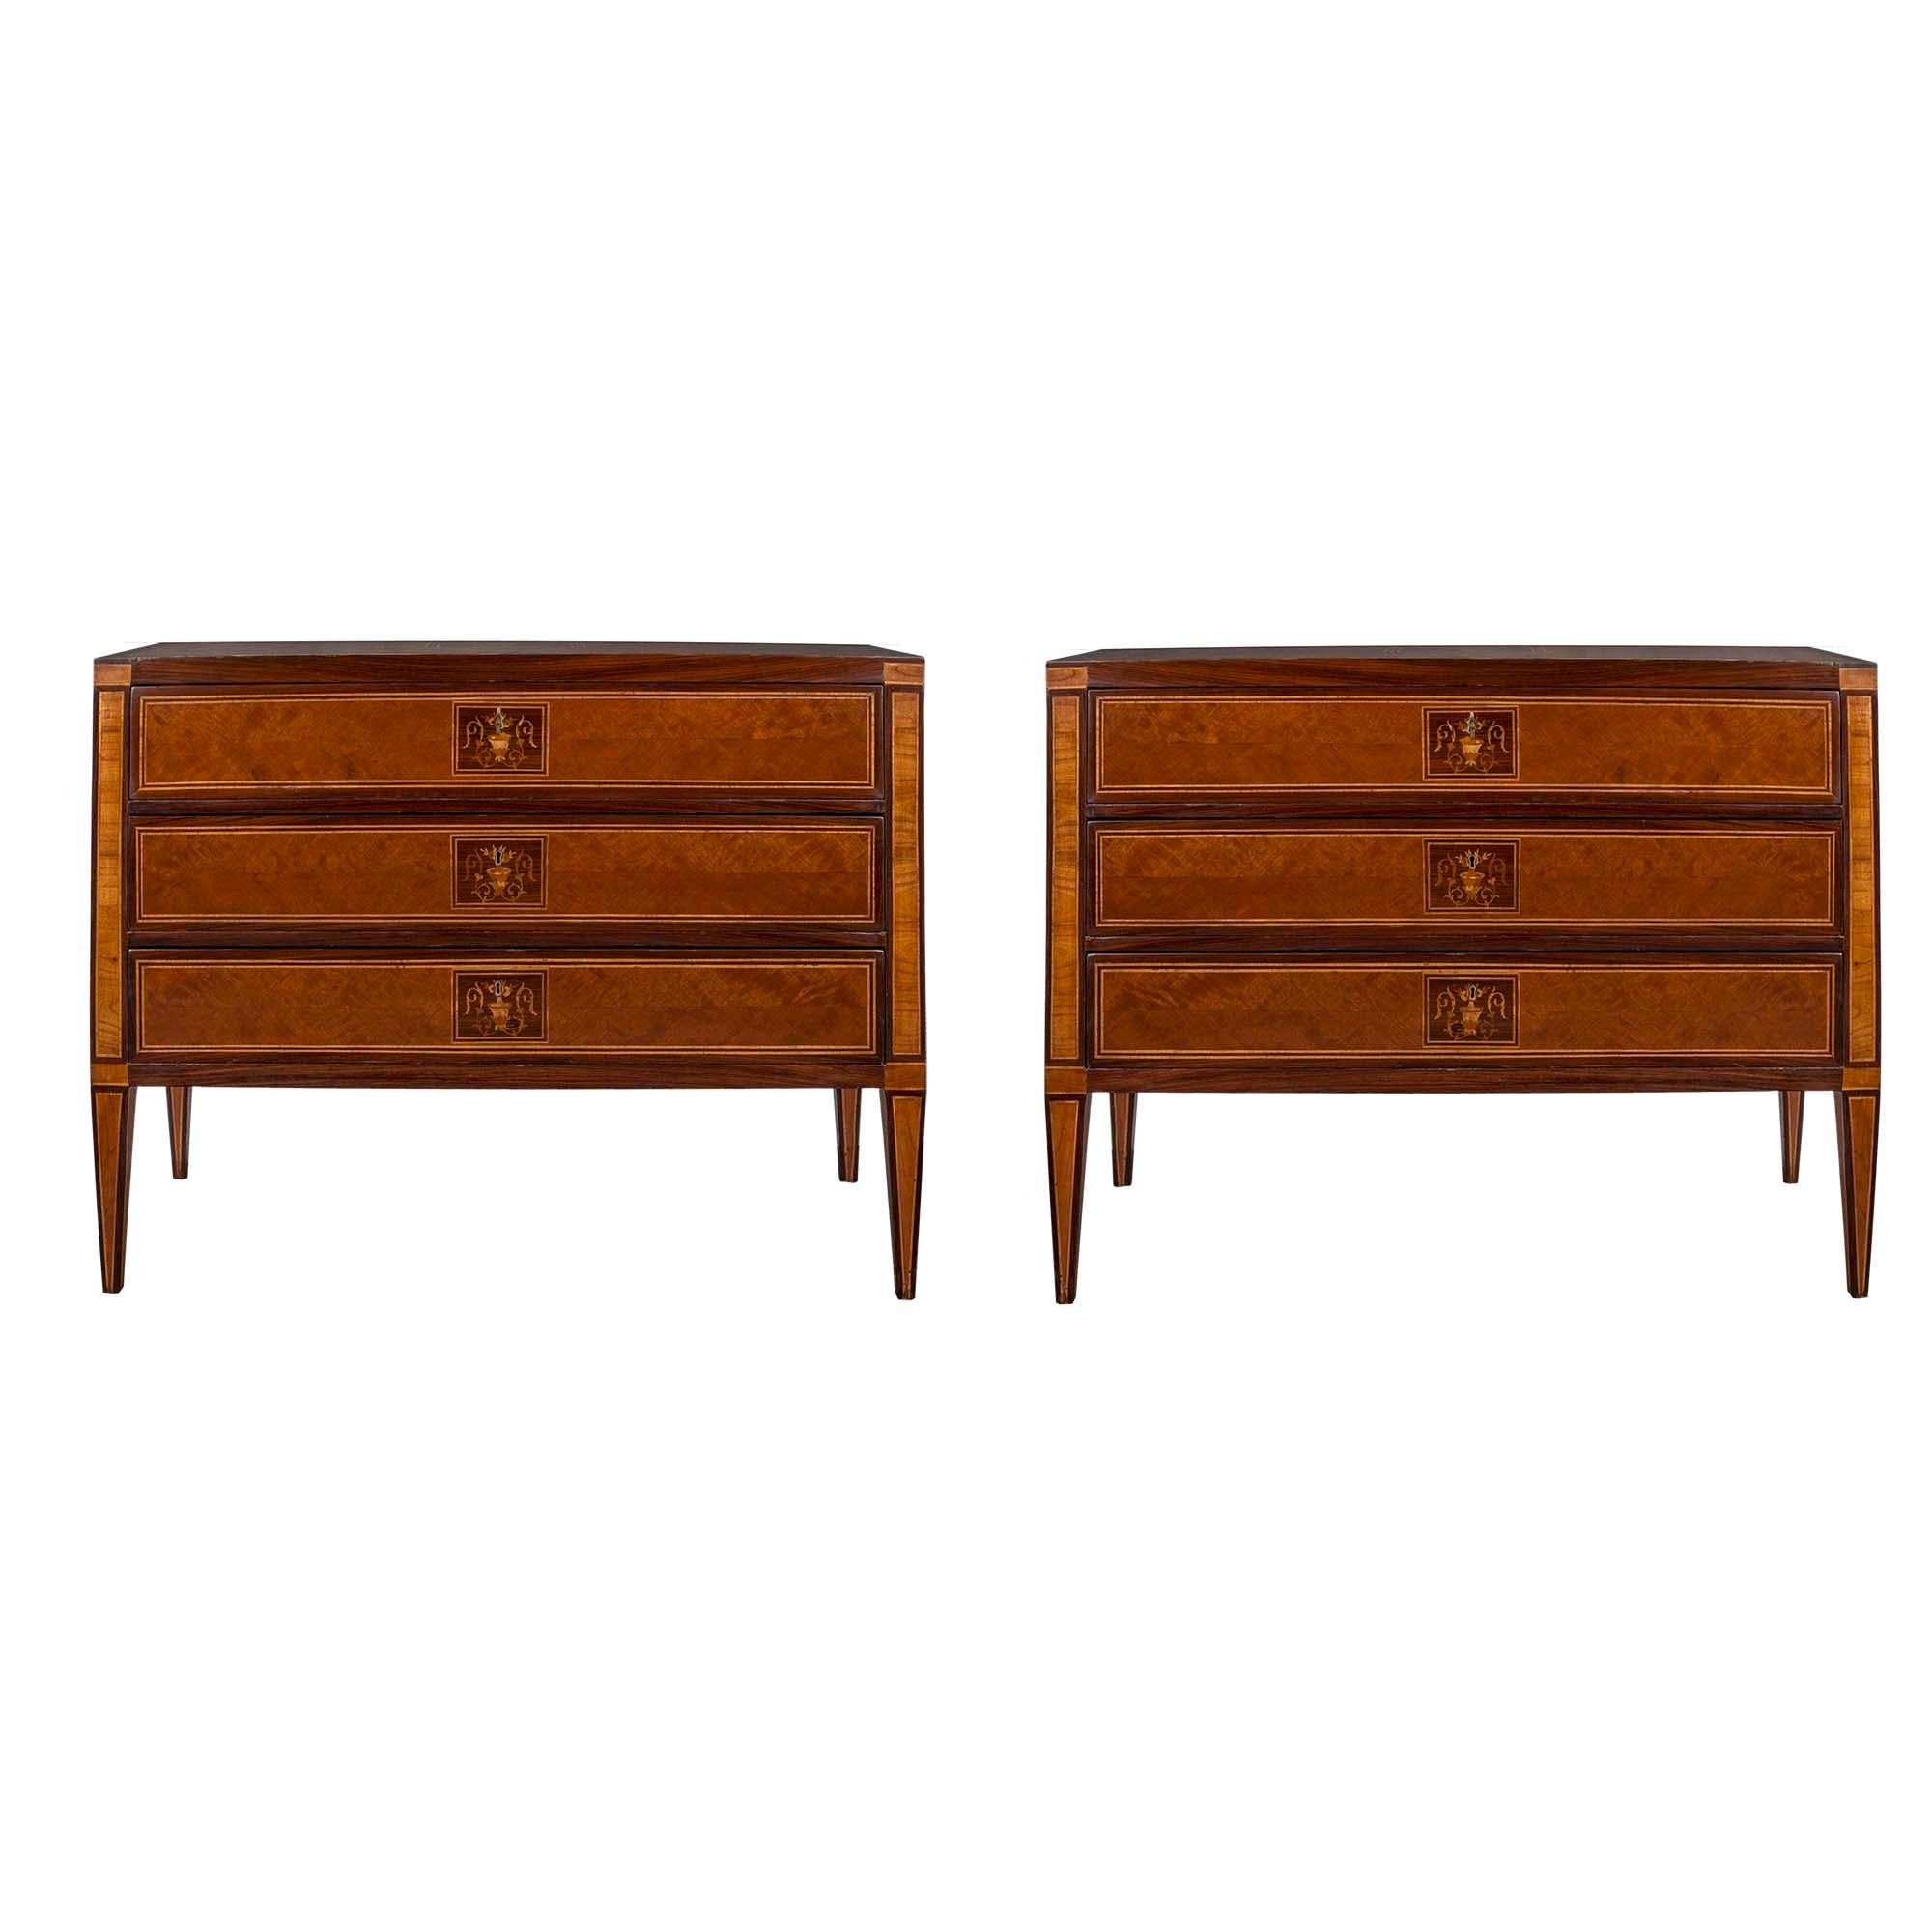 Pair of Italian Early 19th Century Louis XVI Style Mahogany and Walnut Commodes For Sale